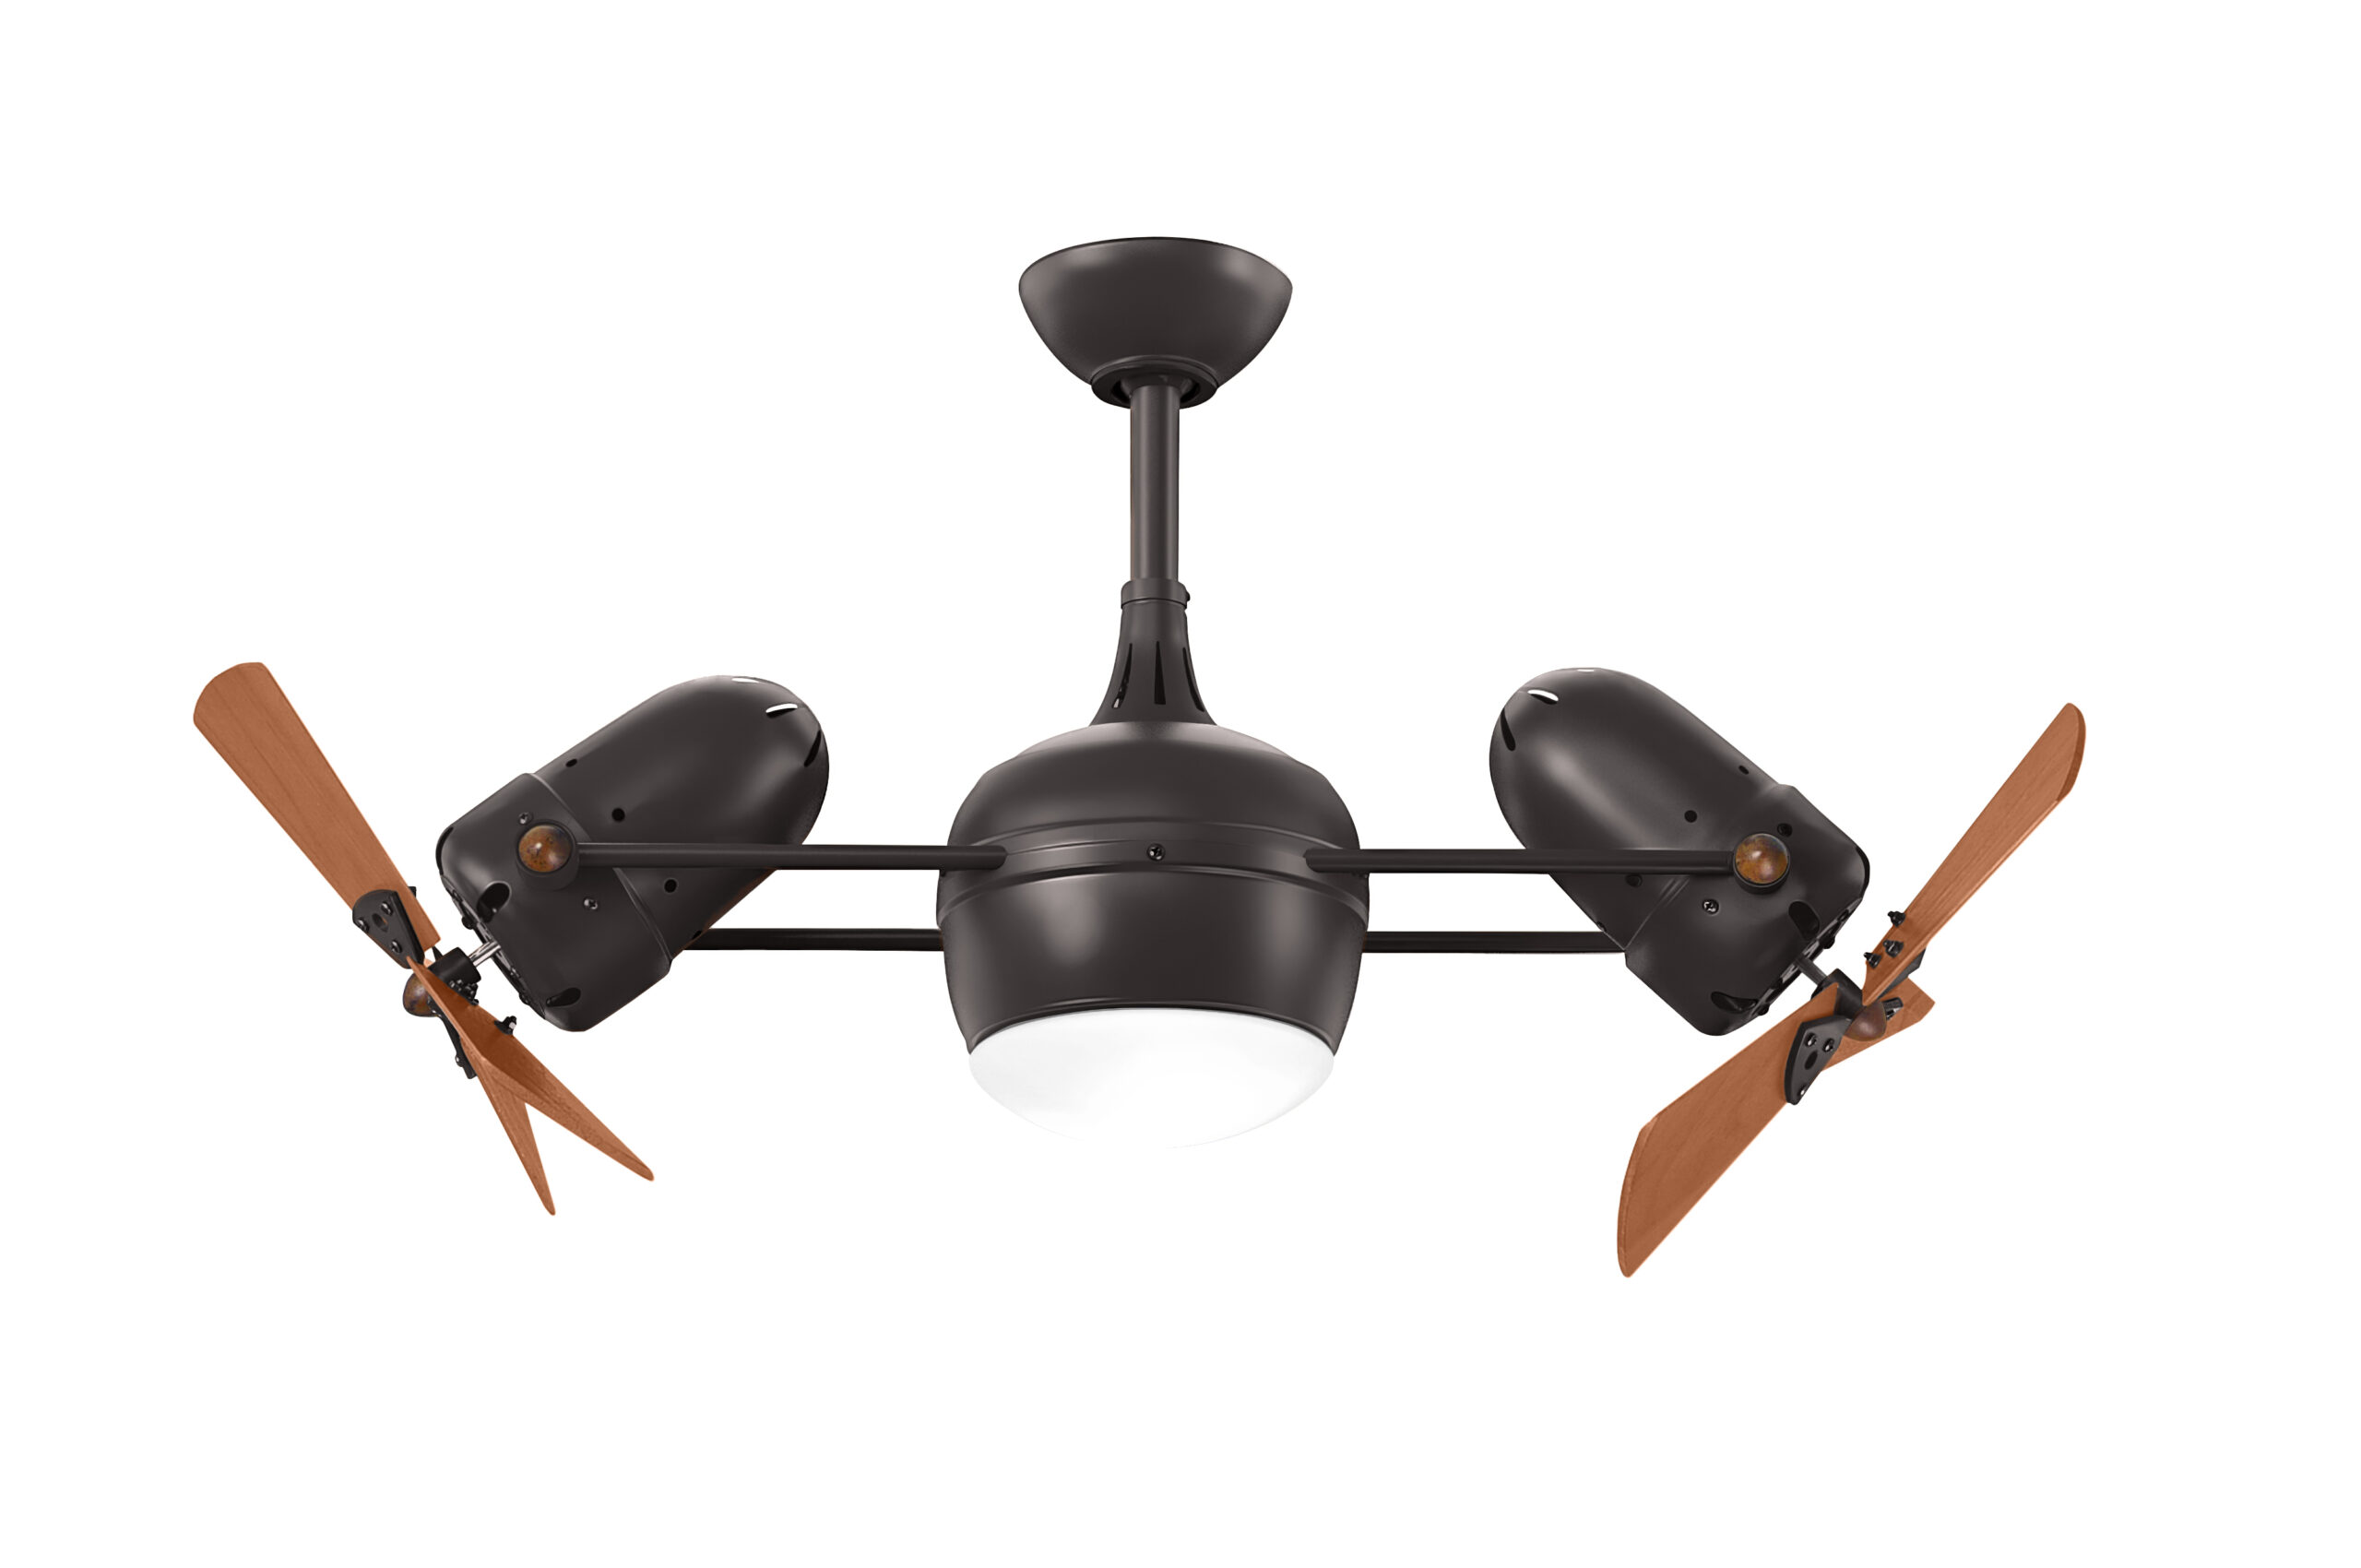 Dagny-LK rotational ceiling fan in Textured Bronze with mahogany wood blades made by Matthews Fan Company.